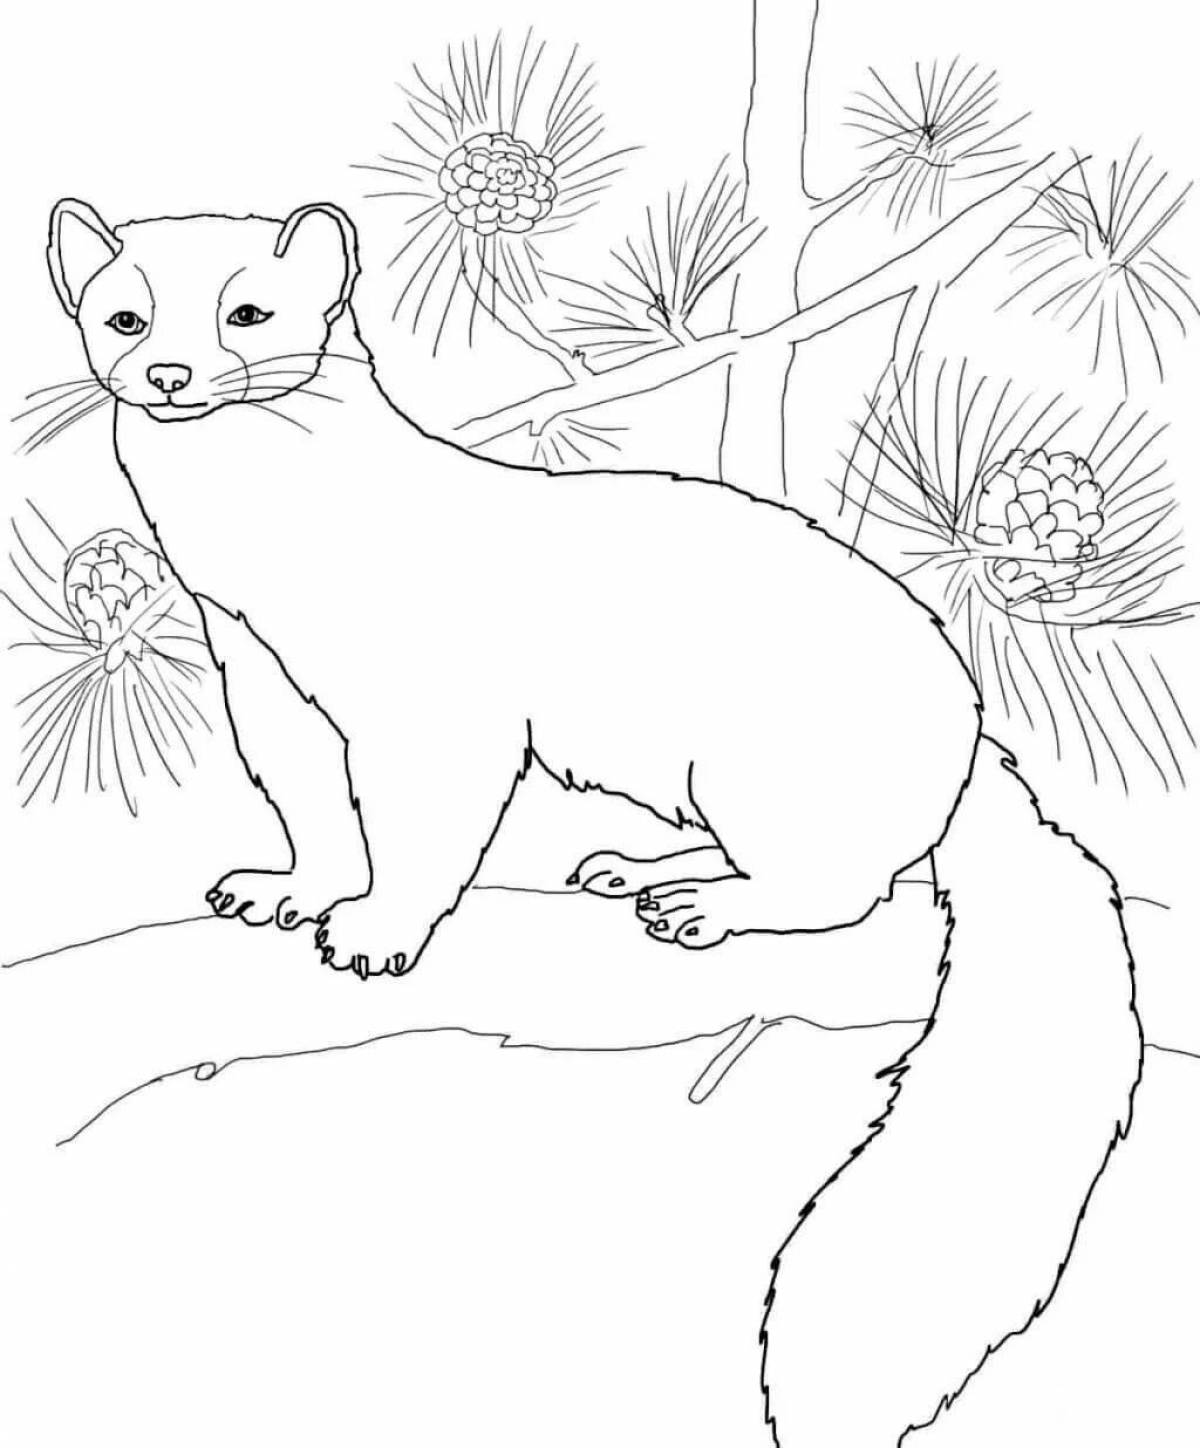 Flawless mink coloring page